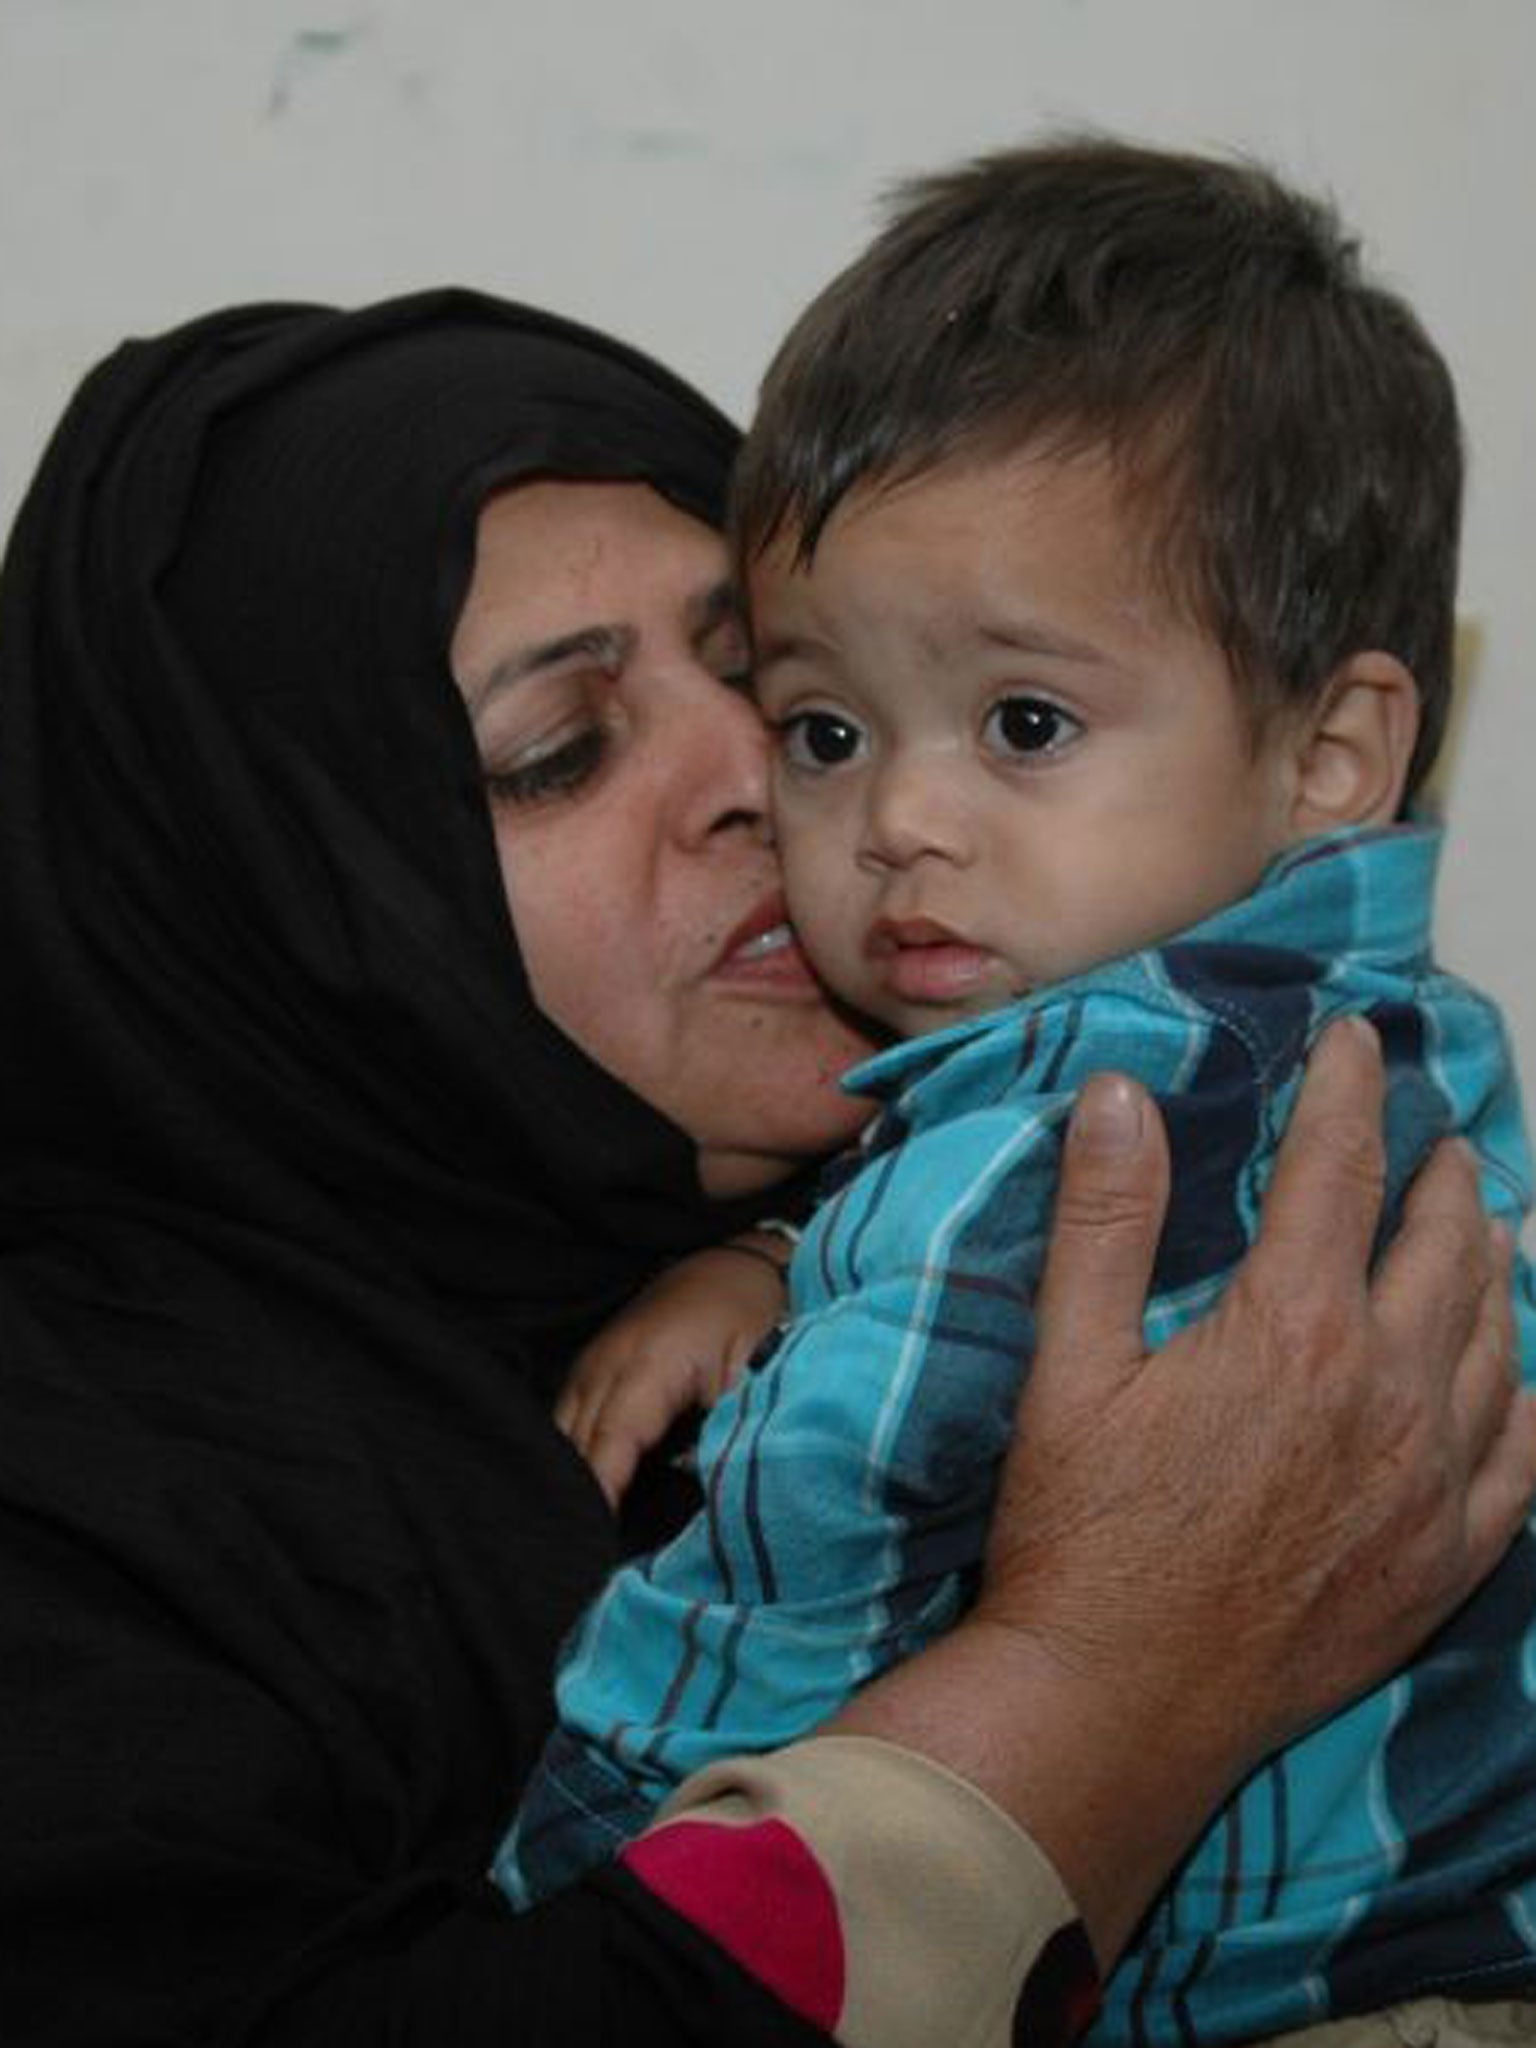 Nine-month-old baby Musa Khan is comforted in a lawyers office on 3 April